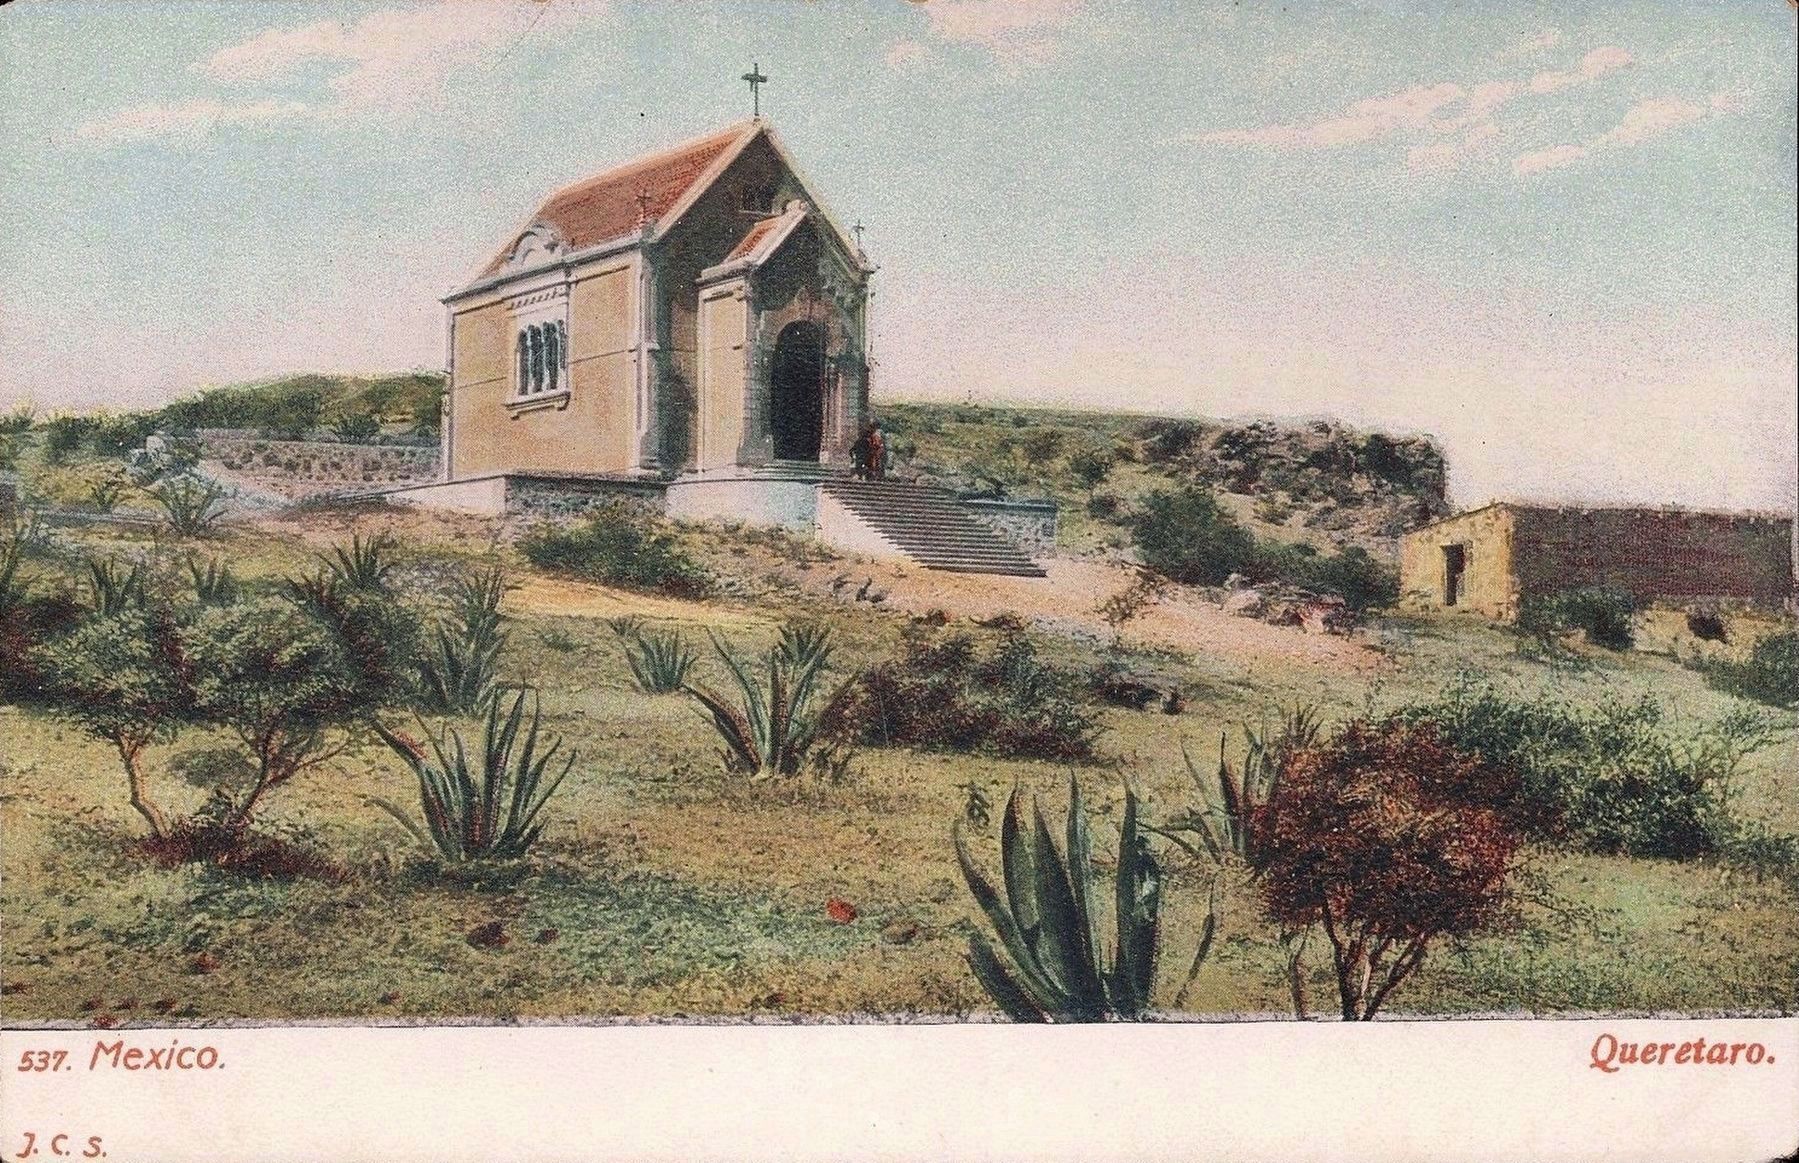 The Maximilian Chapel built in 1900, mentioned in the marker text - Postcard View image. Click for full size.